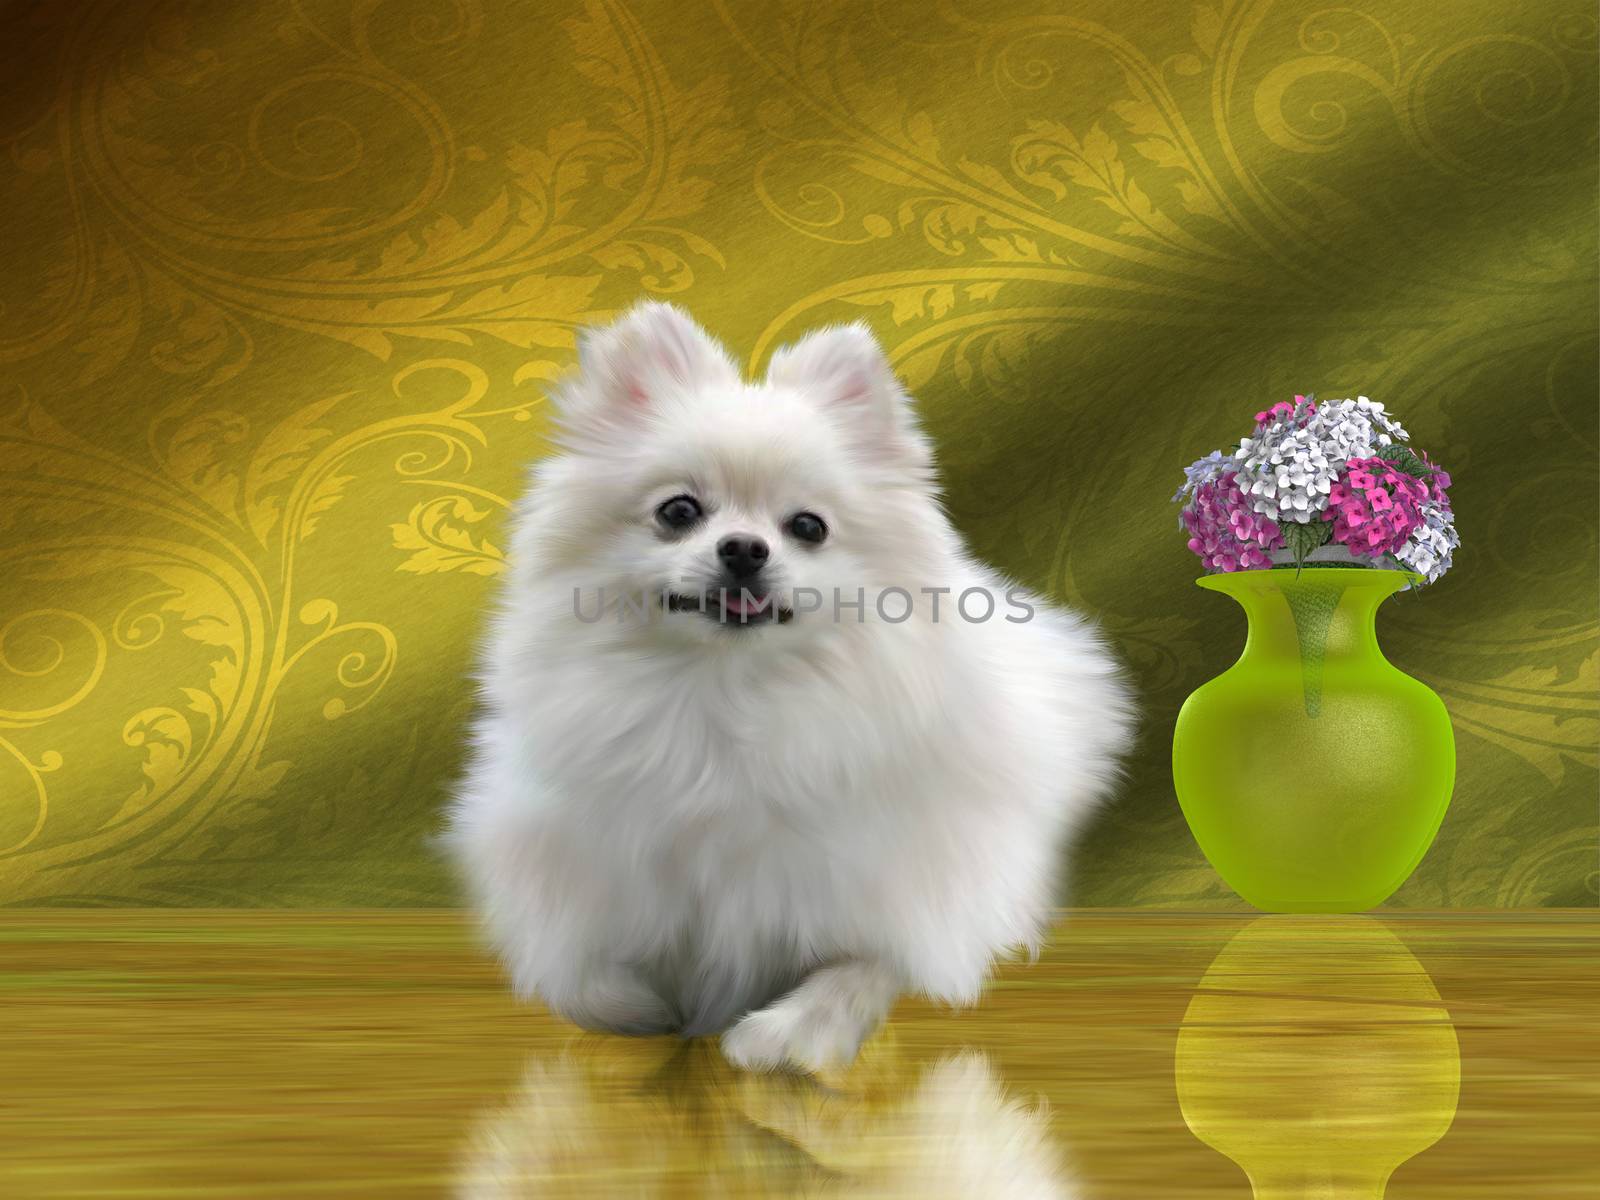 The Pomeranian is a small toy breed of dog that was started in Central Europe and descended from the German Spitz breed.